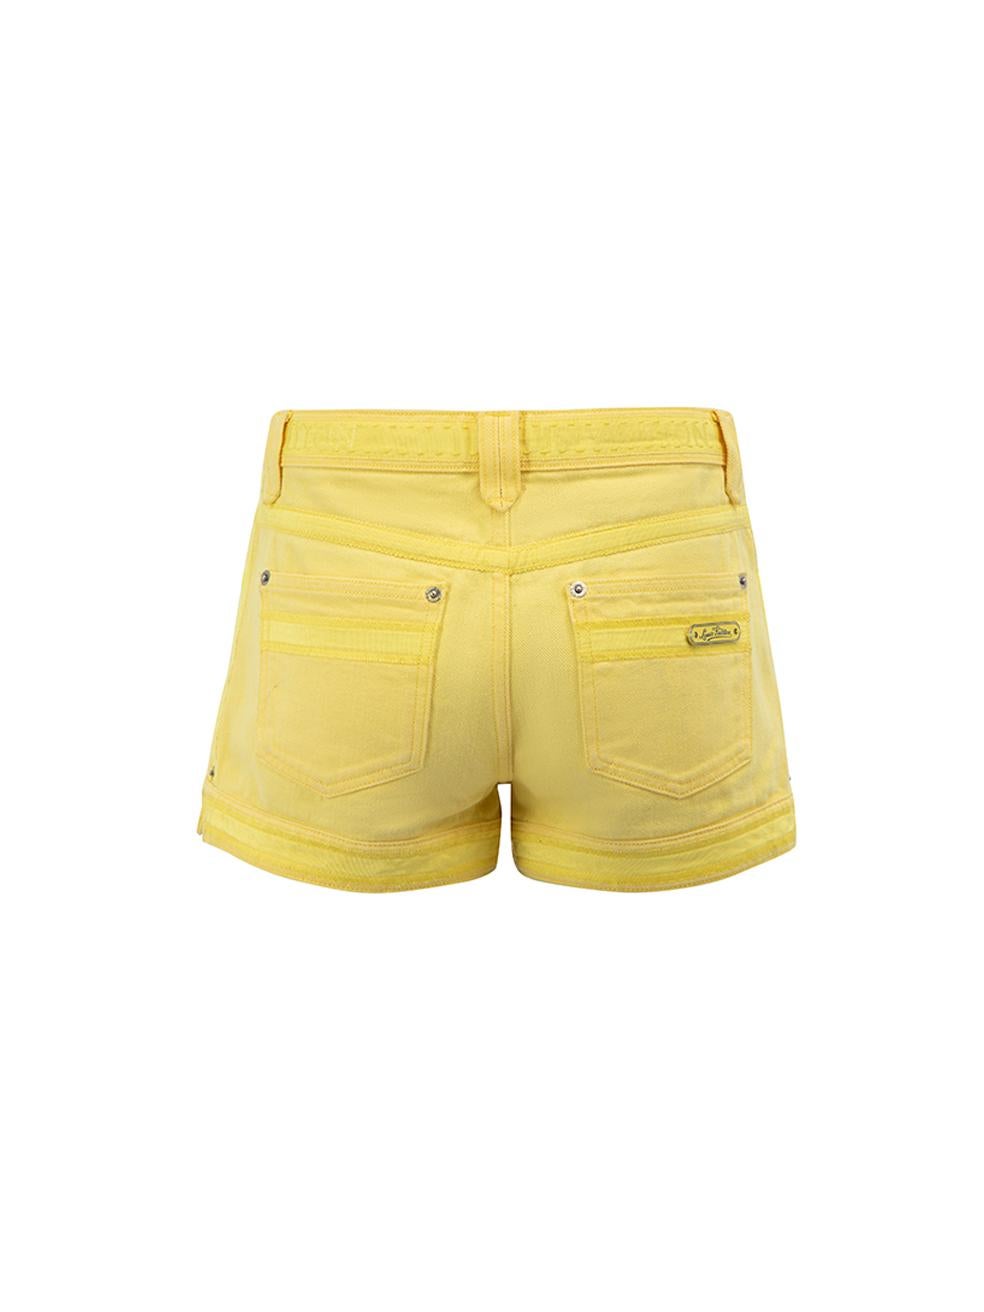 Louis Vuitton Women's Yellow Denim Low Rise Shorts In Excellent Condition For Sale In London, GB